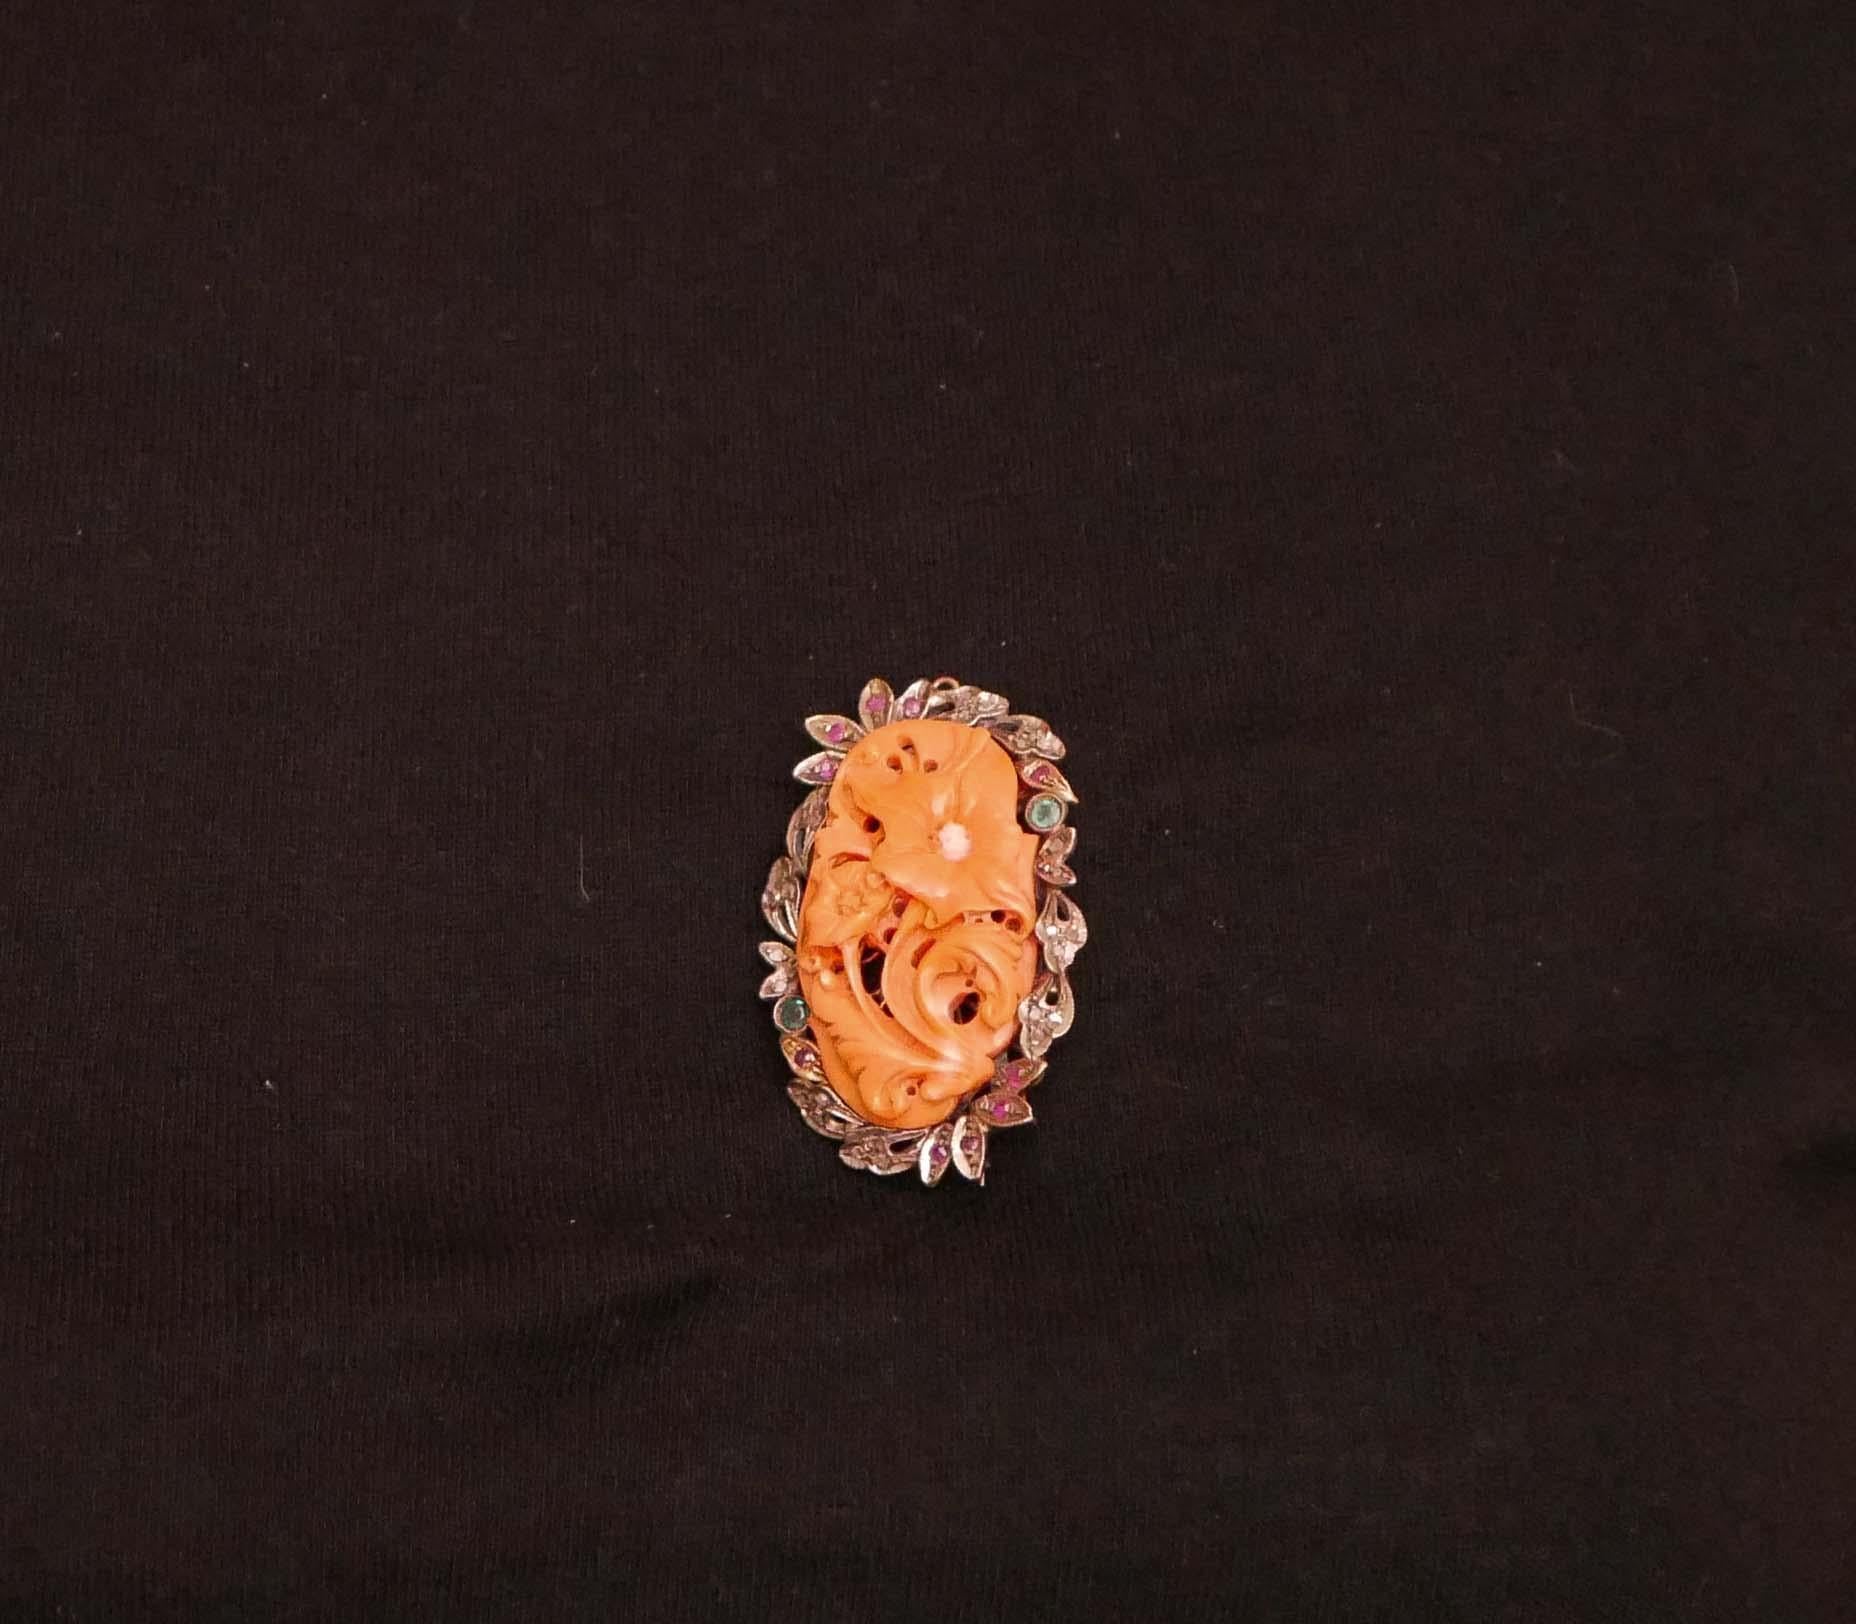 Coral, Emeralds, Rubies, Diamonds, Rose Gold and Silver Pendant/Brooch. For Sale 2